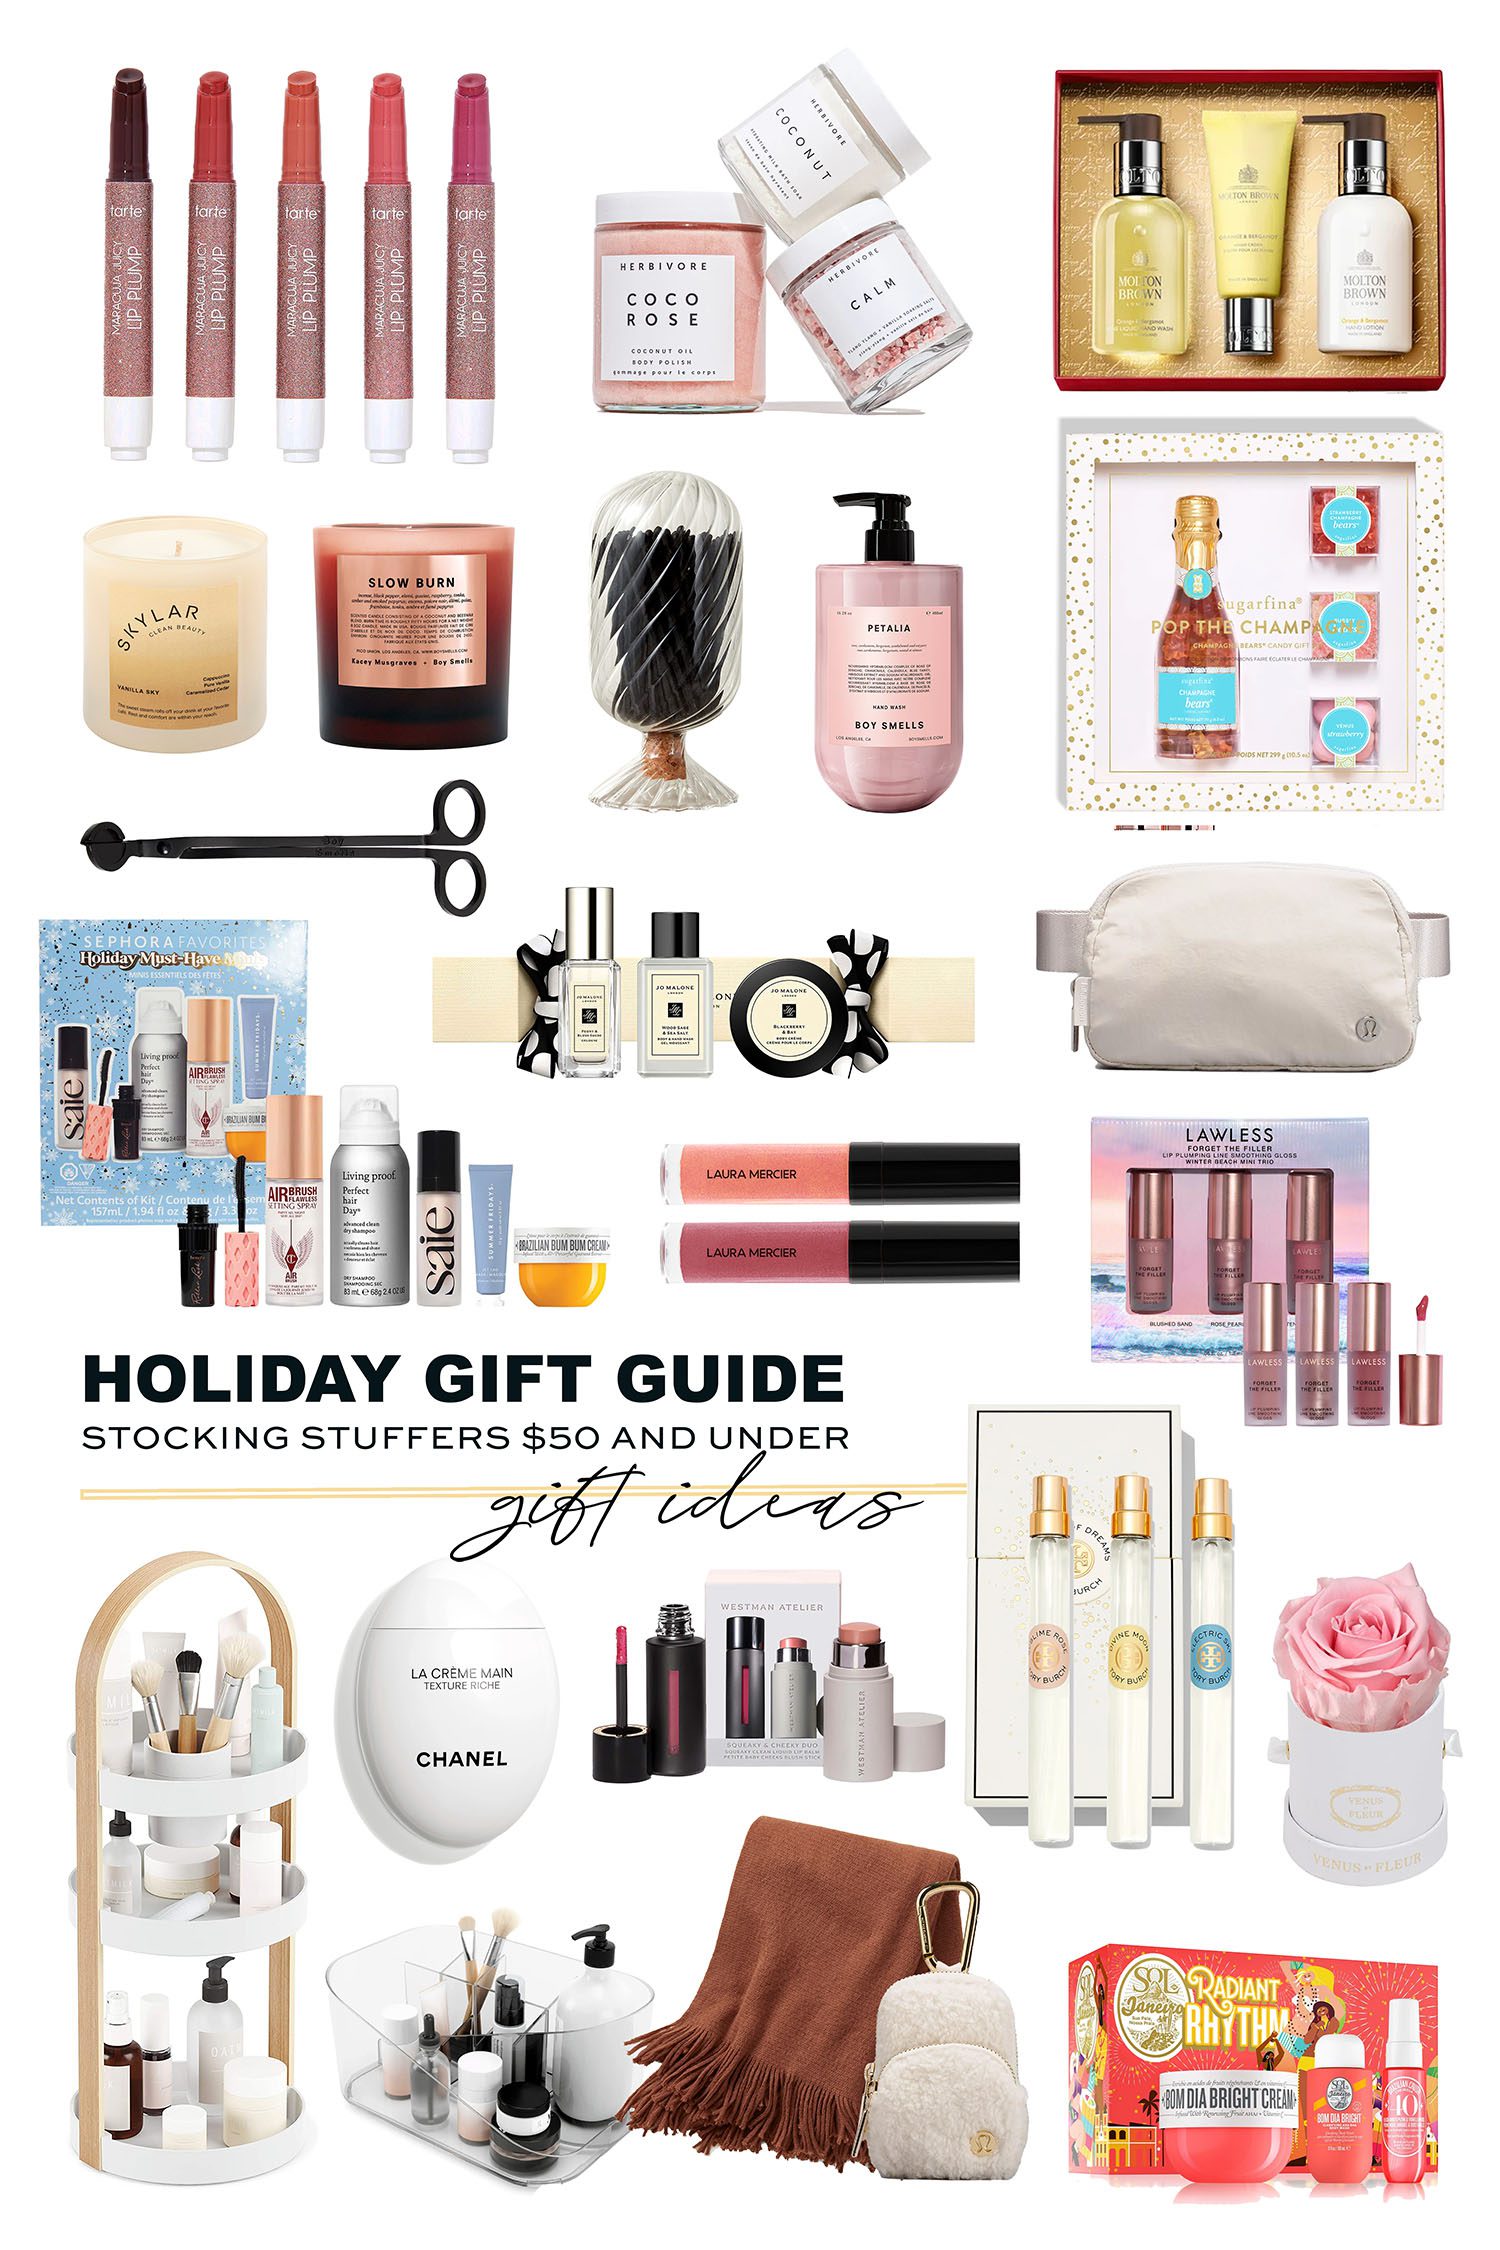 Holiday Gift Guide: 50 Under $50, bright and beautiful